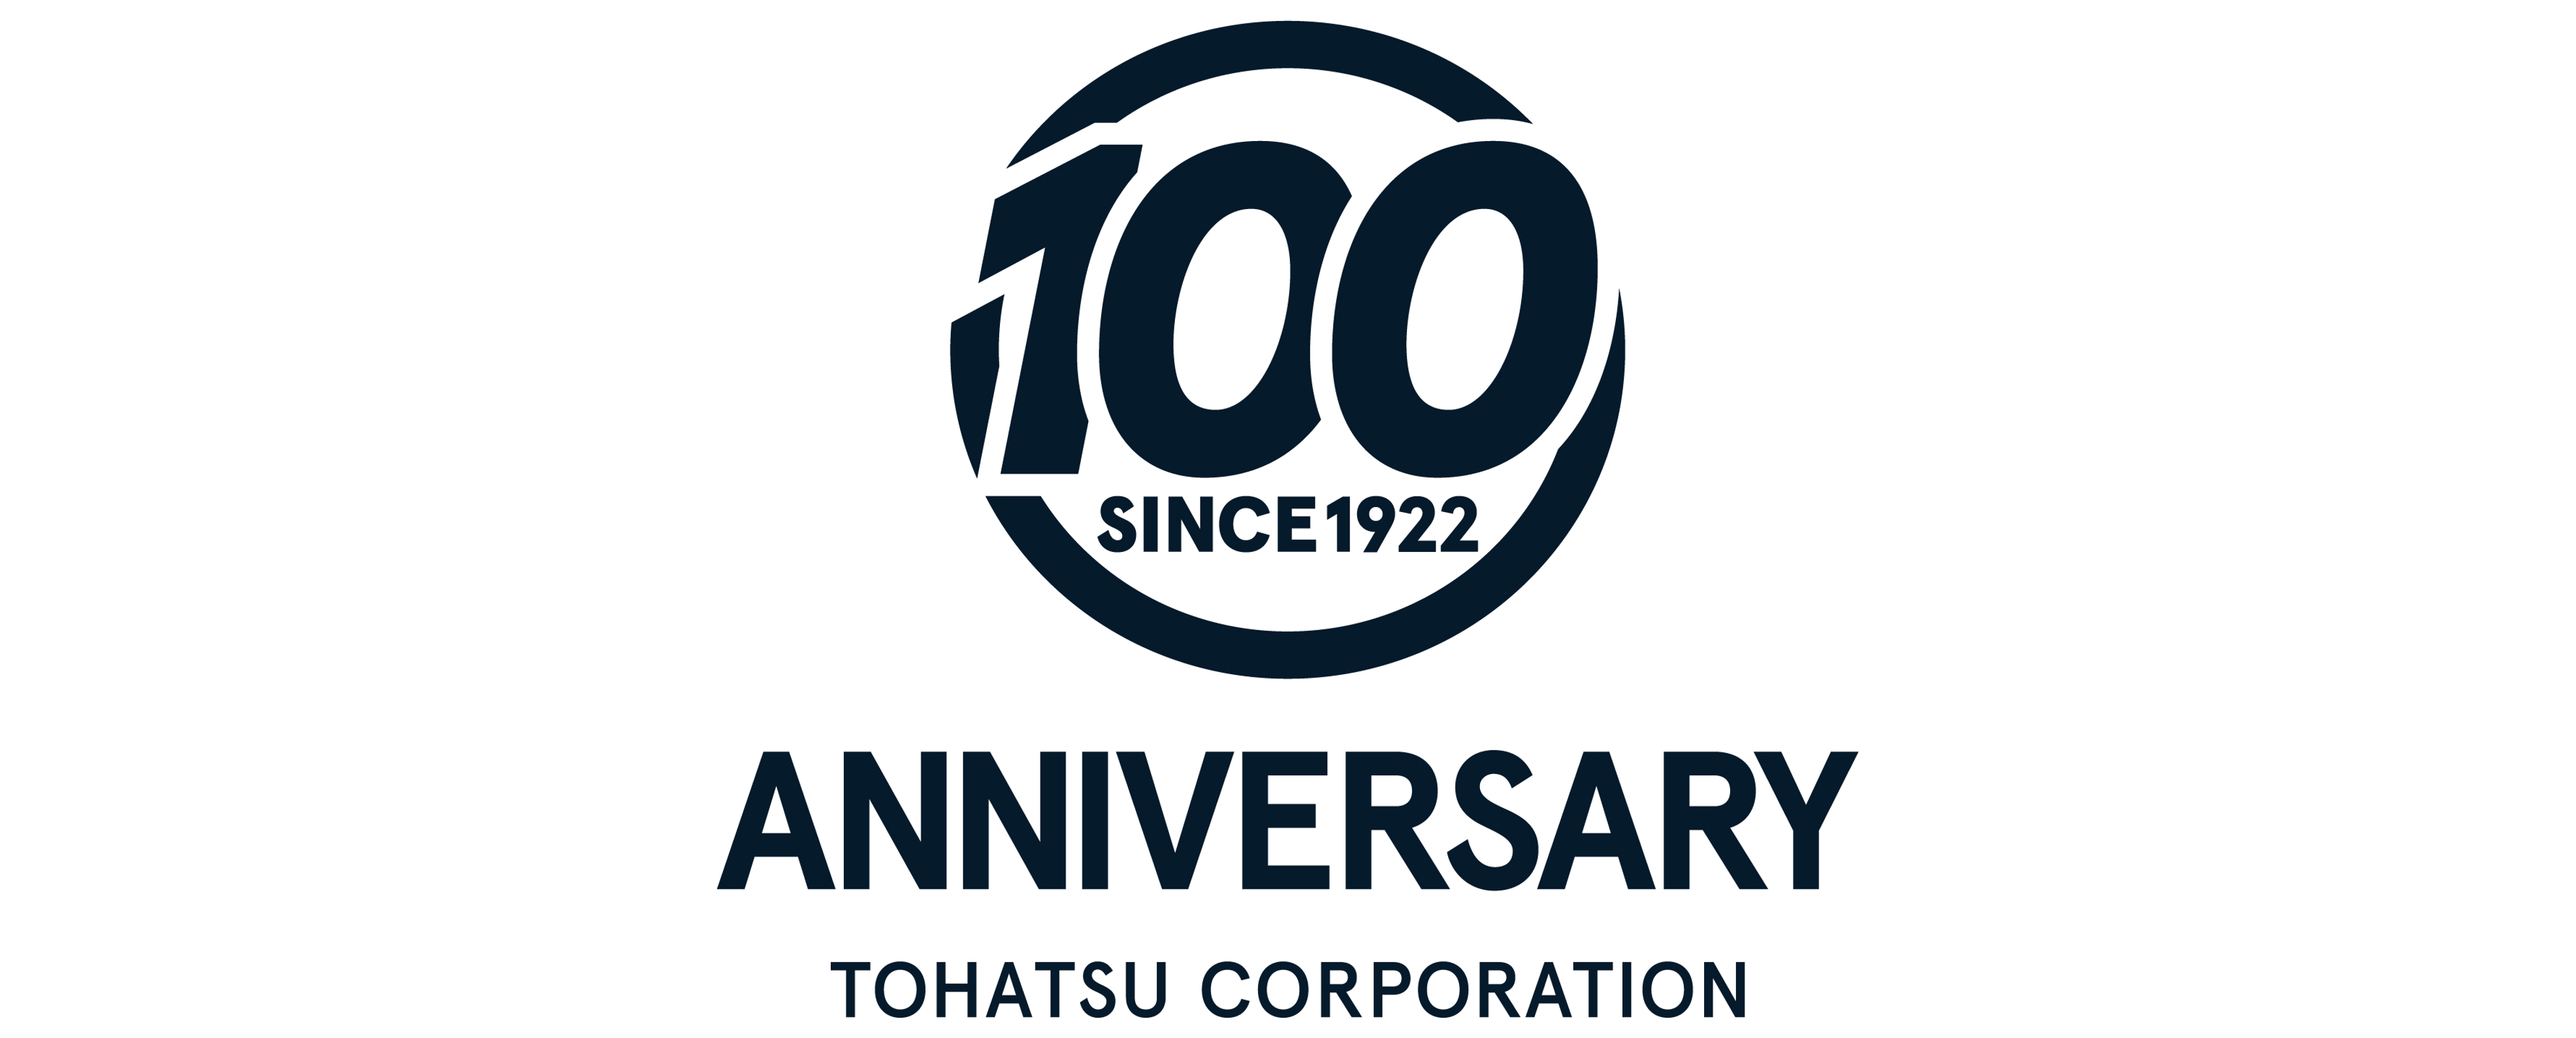 Announcement of 100th Anniversary